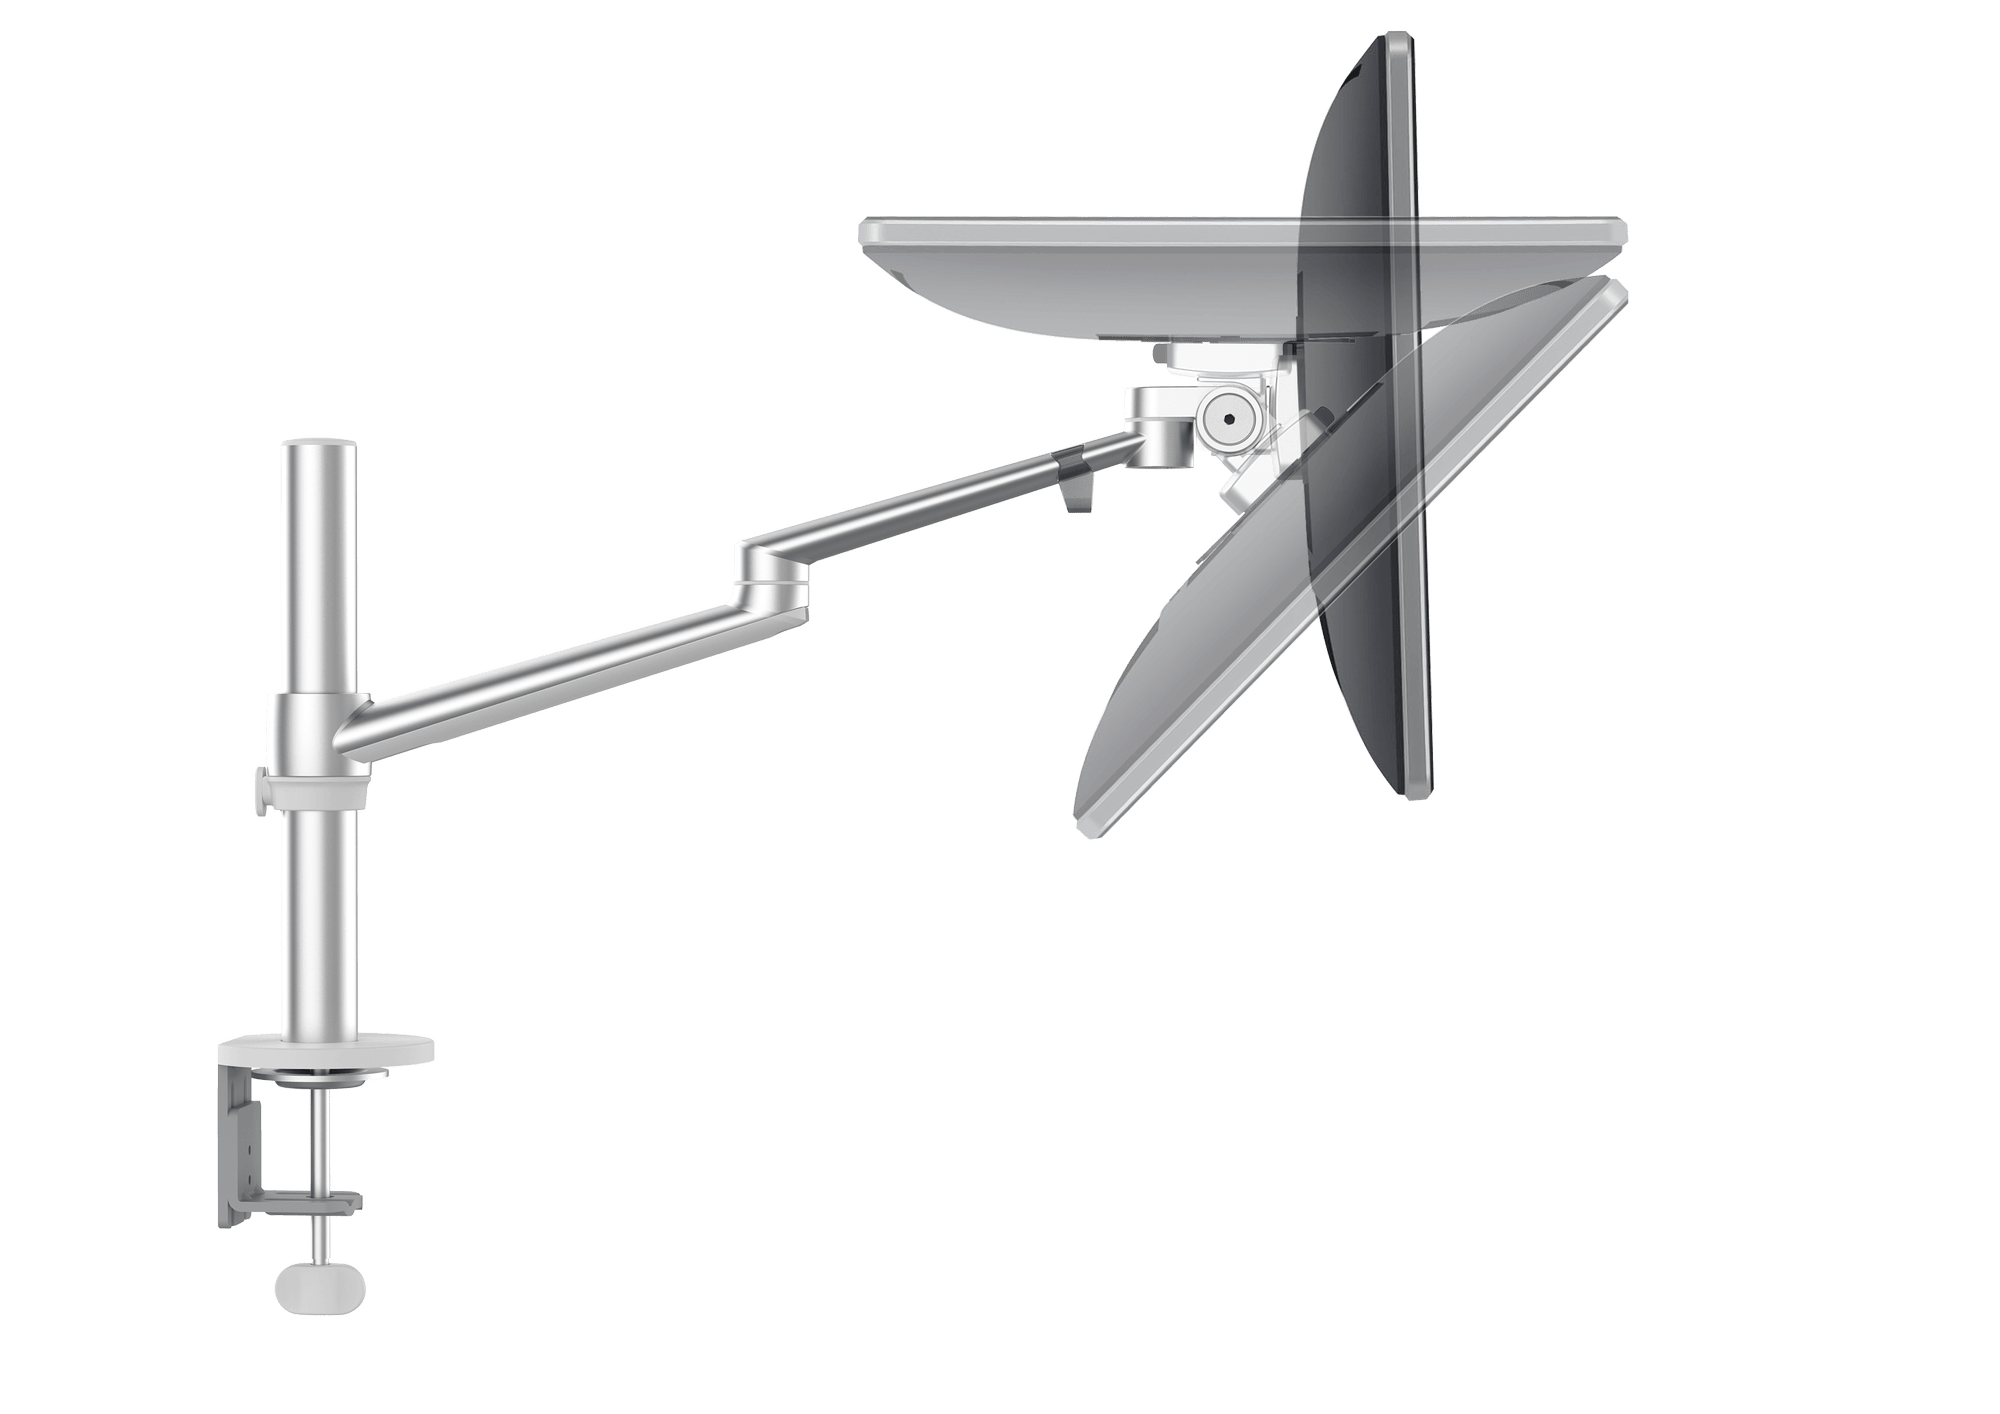 Tiltable display of monitor table mount